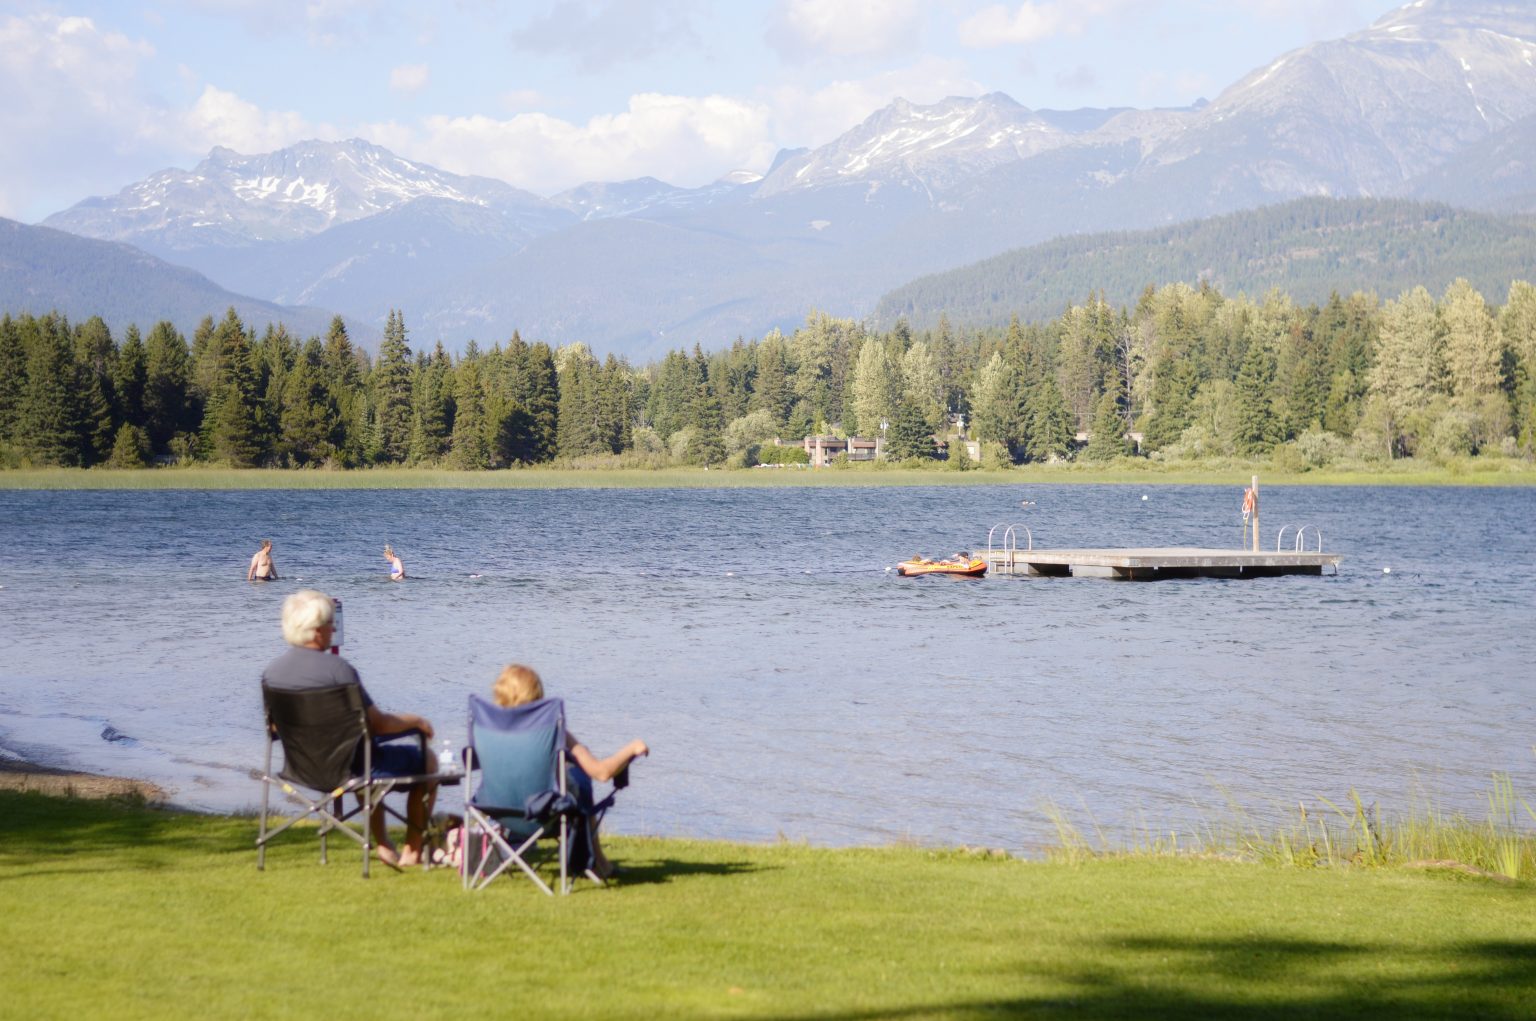 a man and woman sitting on chairs by a lake